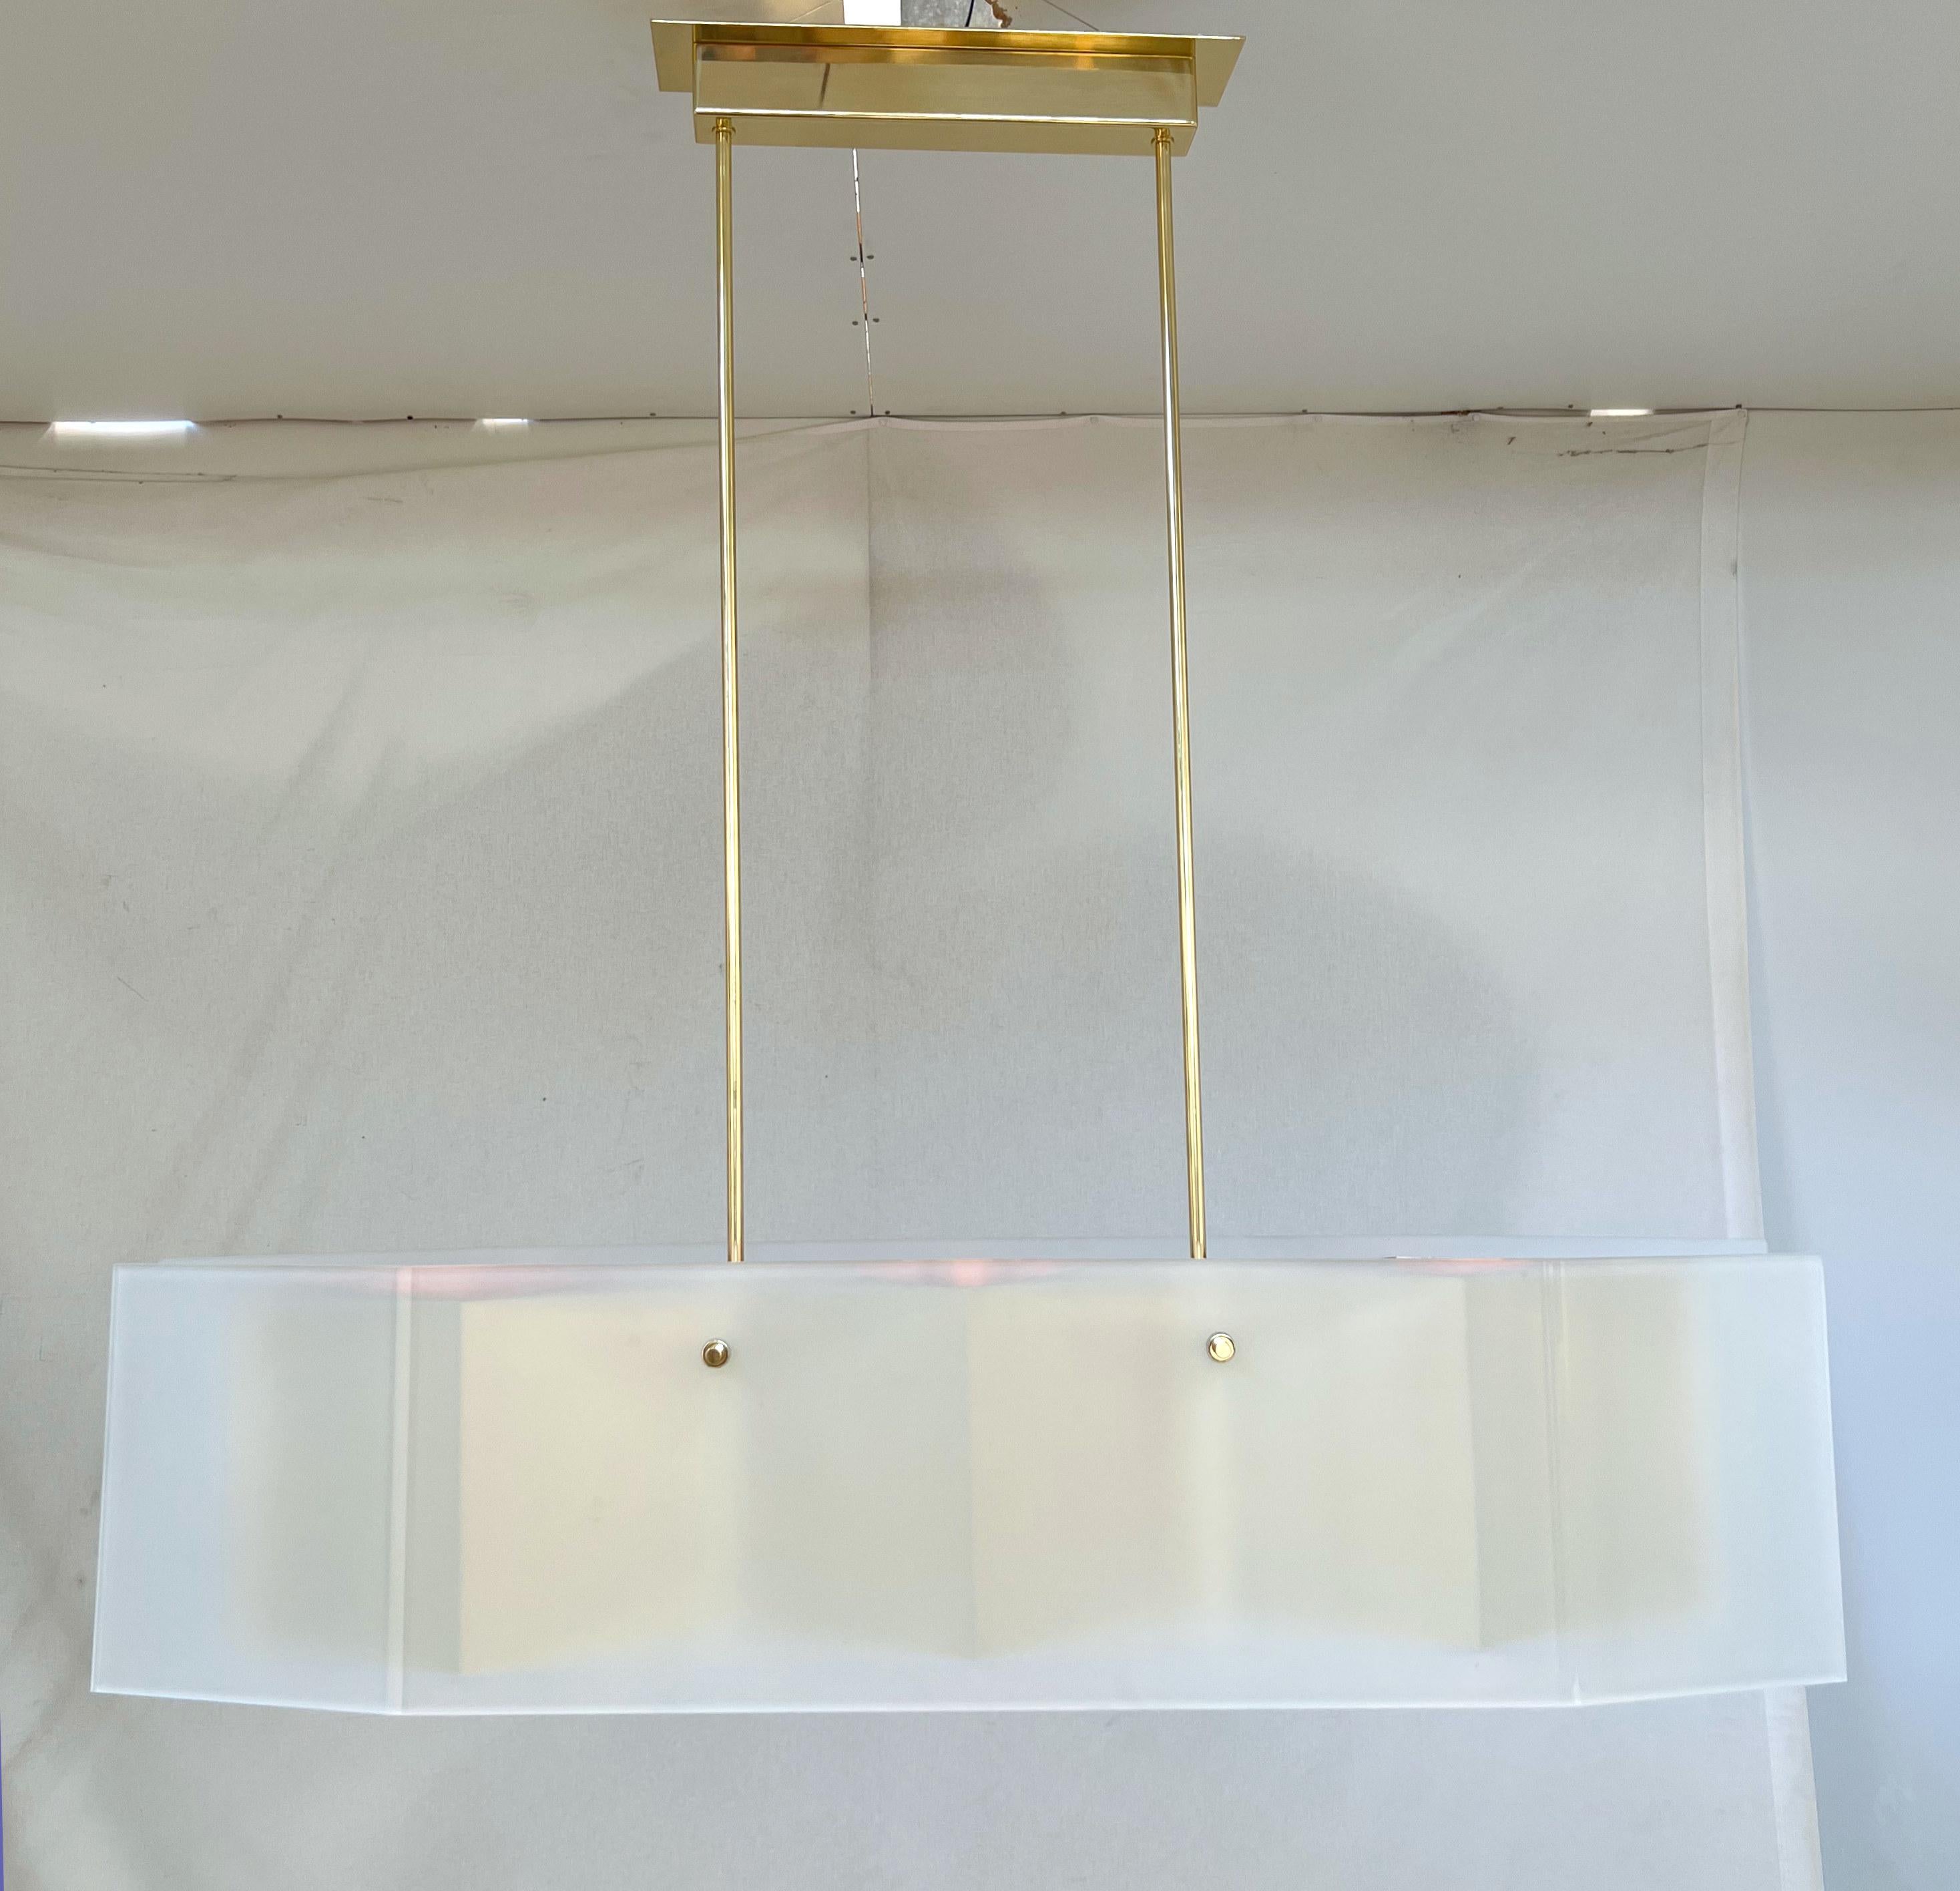 Italian modern chandelier with elongated frosted glass panels mounted on polished brass frame with diamond shaped bottom glass diffusers / Made in Italy
Measures: width 52.5 inches / depth 10.5 inches / height 12.5 inches / total height 51 inches